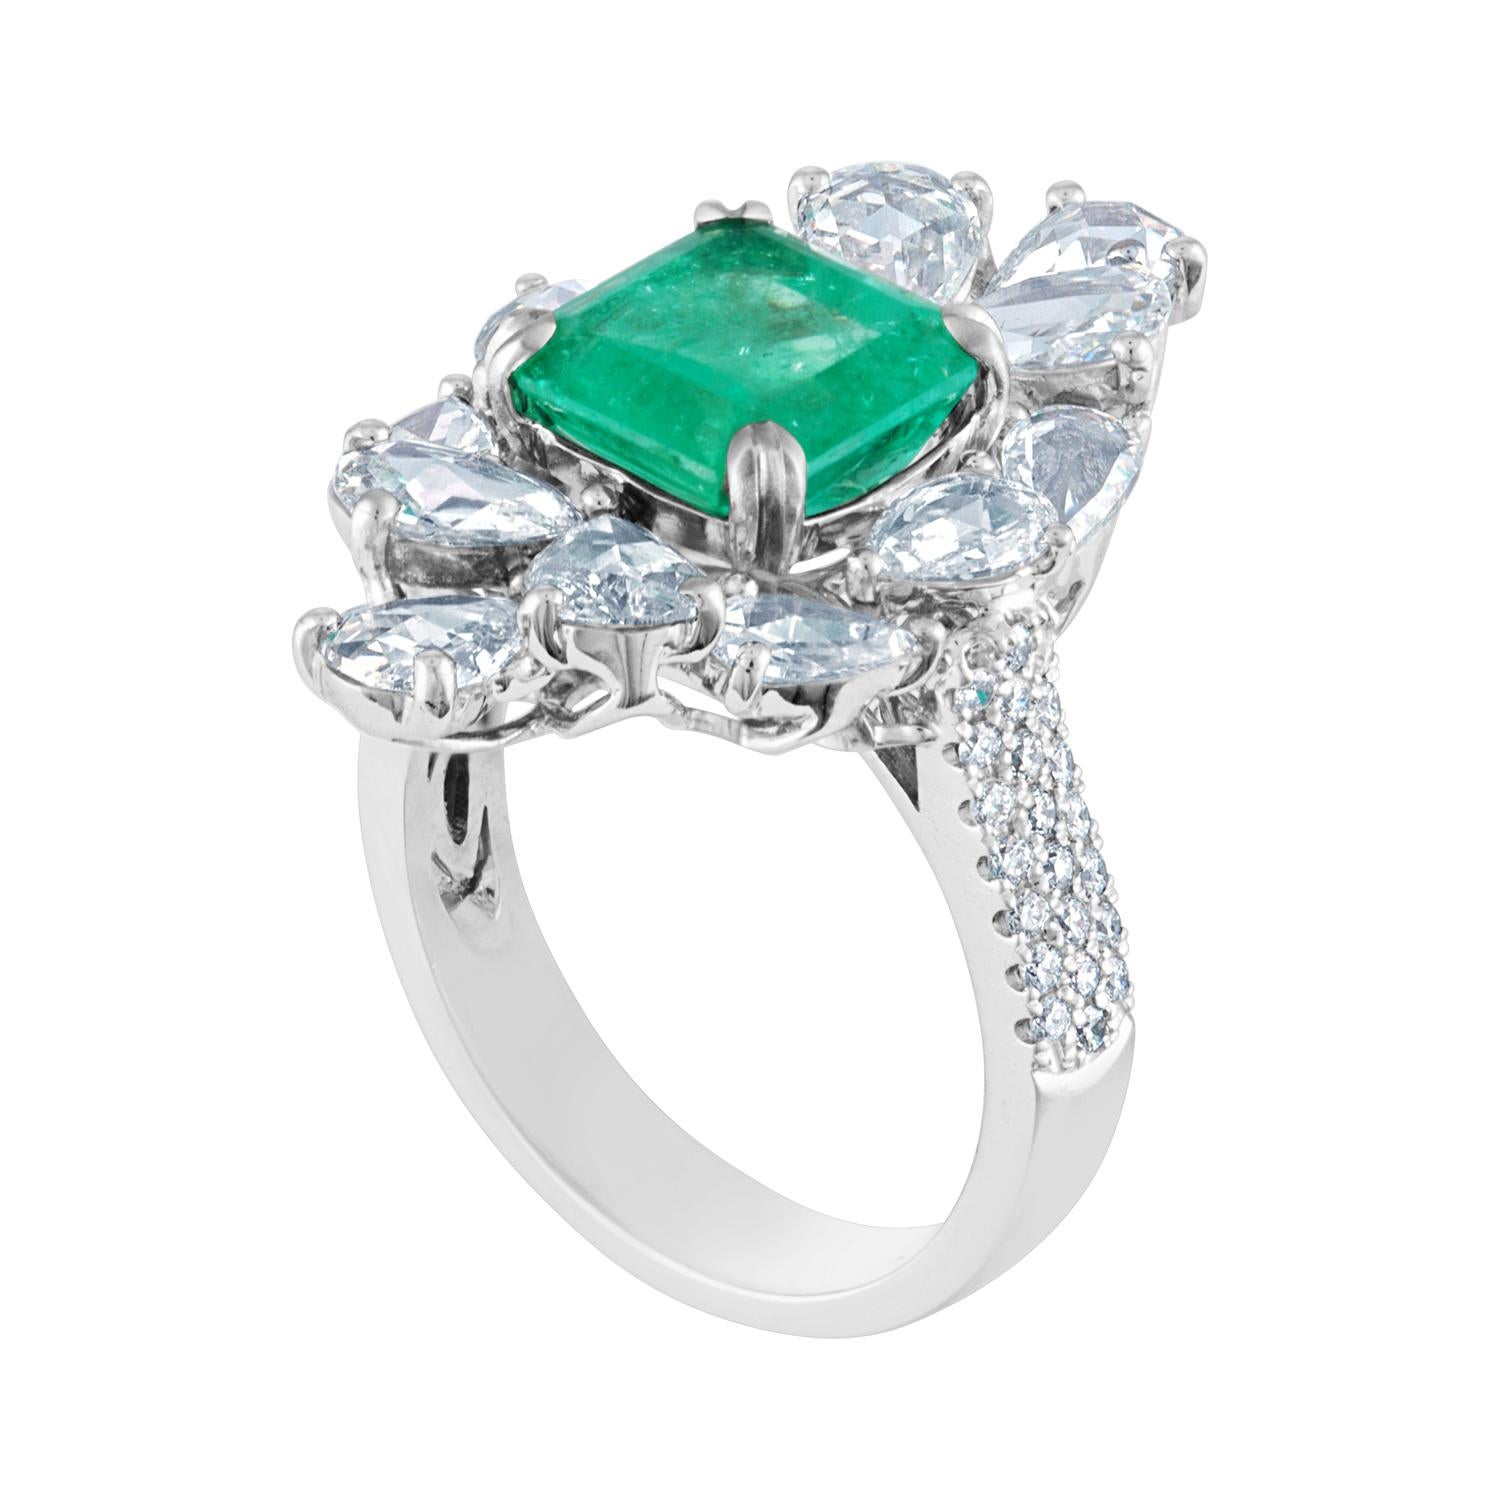 Emerald Ring to Envy
The ring is 18K White Gold
The Emerald is 2.99 Carats Square Emerald Cut
The Emerald is AGL Certified Oil Treatment Only
There are 2.04 Carats in Rose Cut Diamonds G VS
There are 0.32 Carats in Round Diamonds G VS
The ring is a